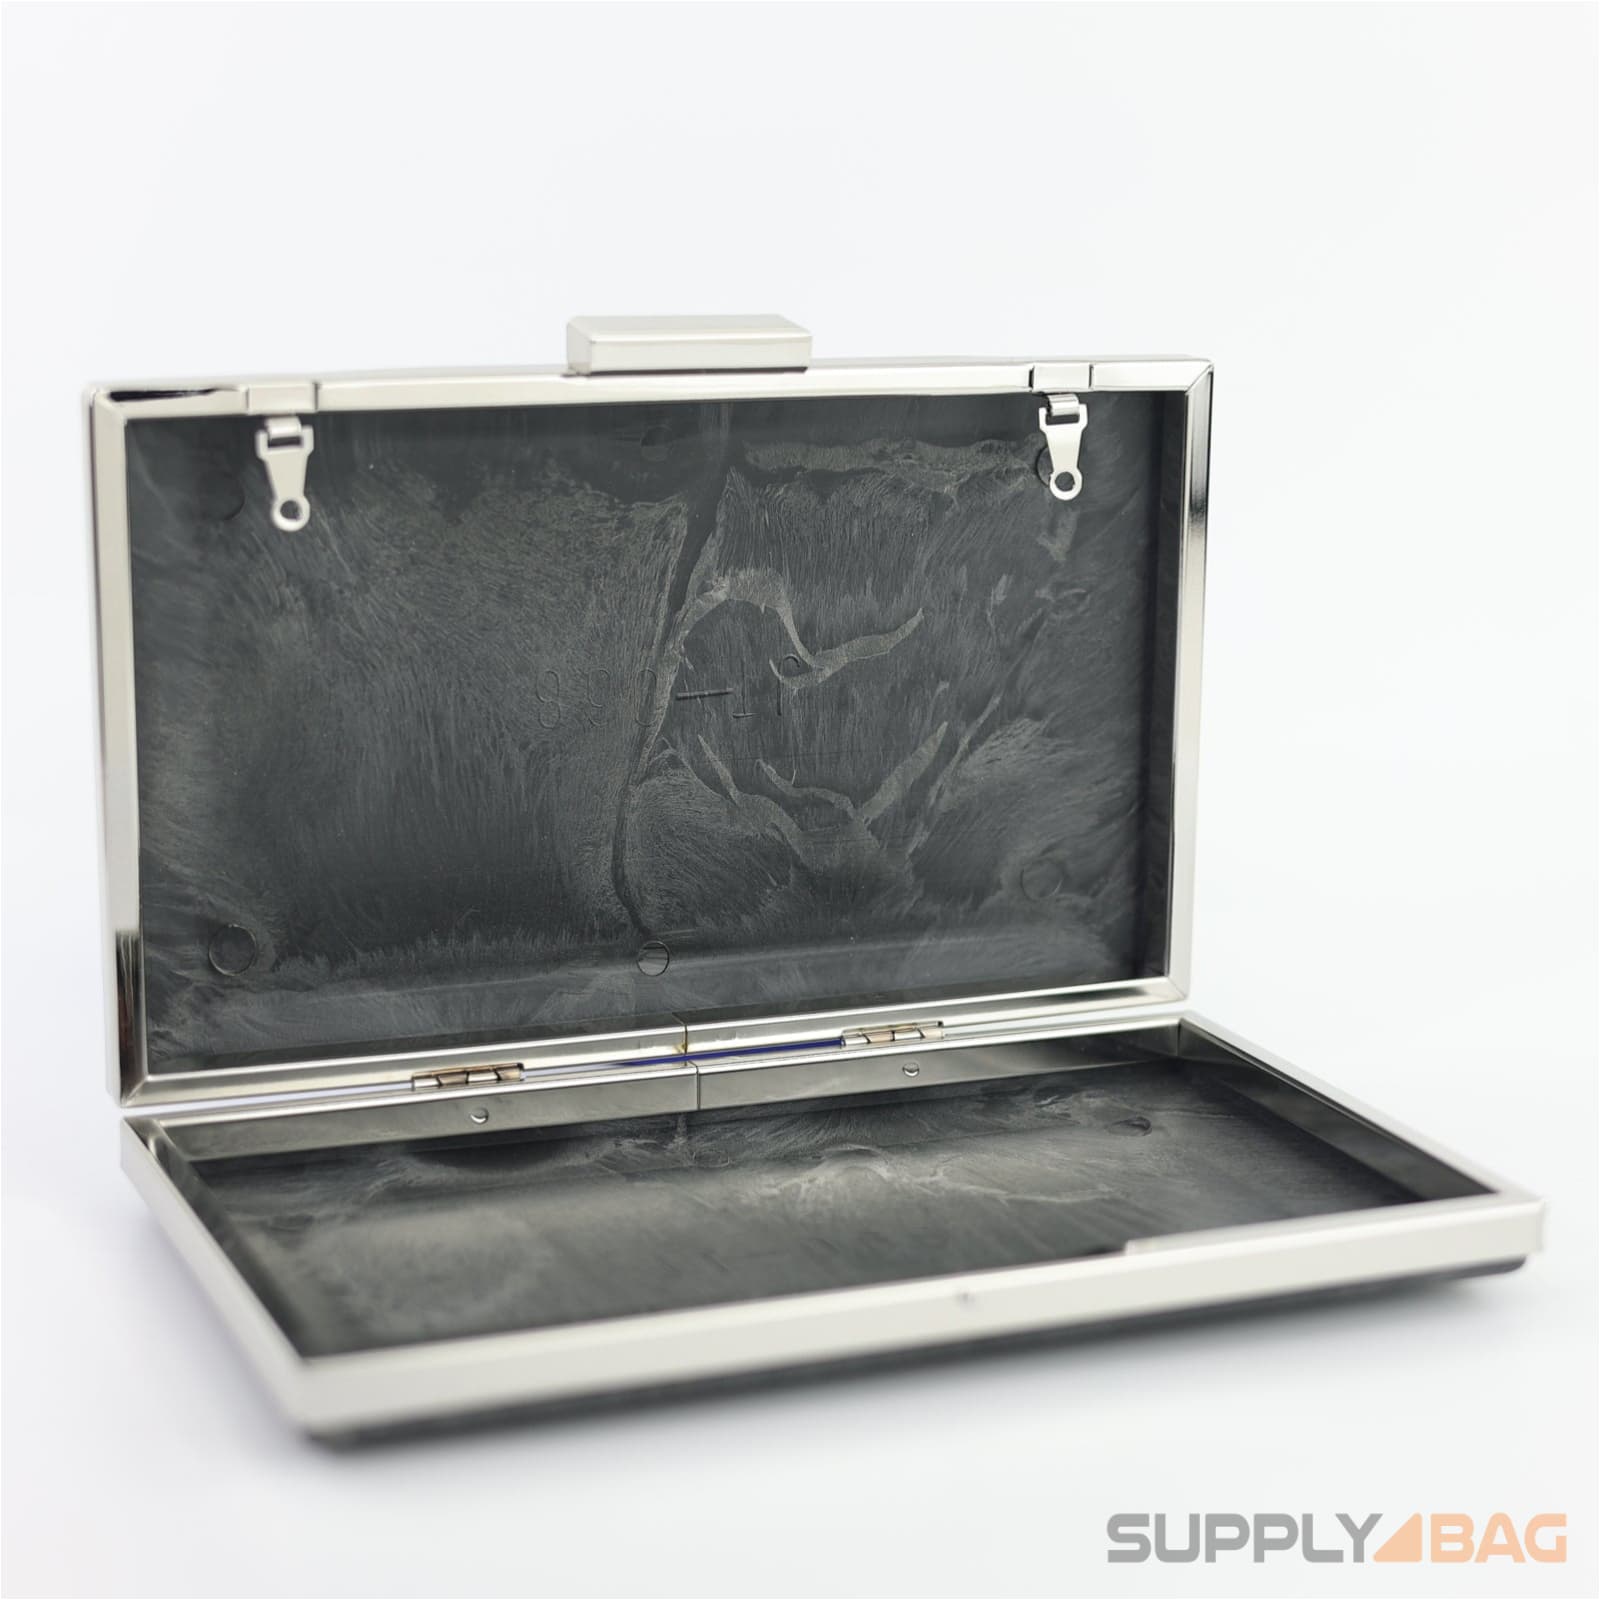 7 7/8 x 4 3/4 inch - silver clamshell clutch frame with covers